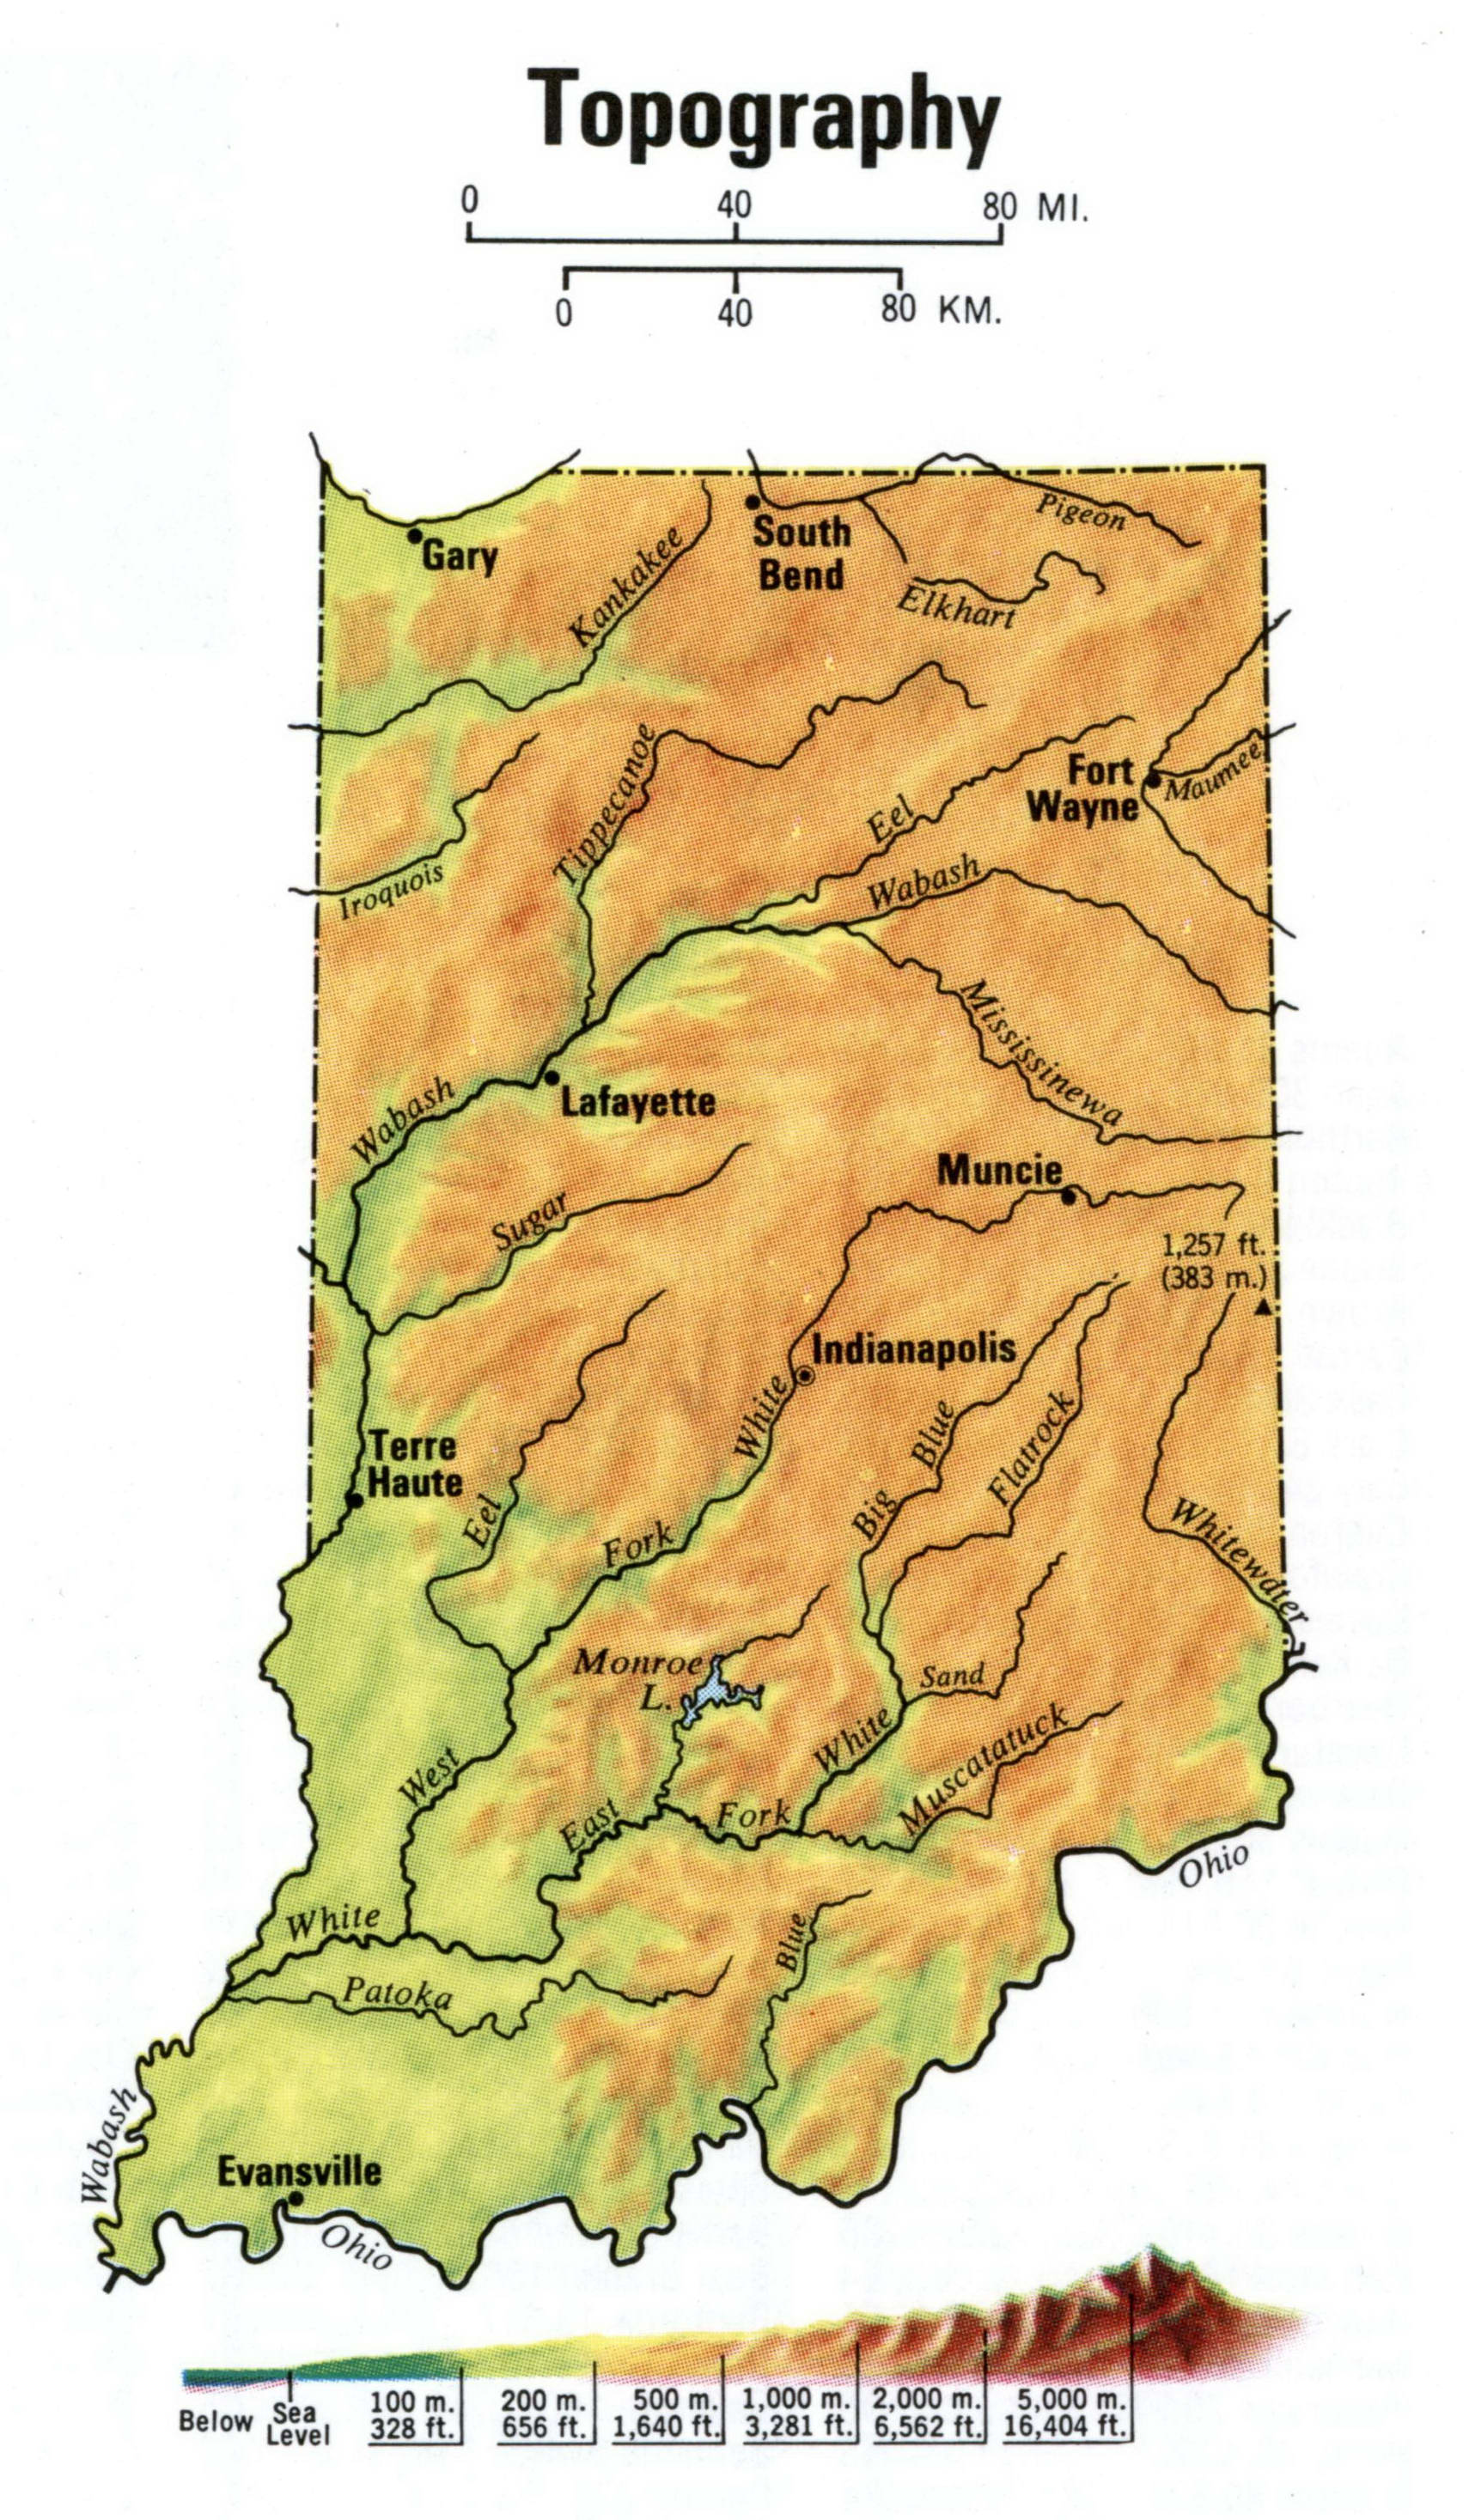 Topographical map of Indiana